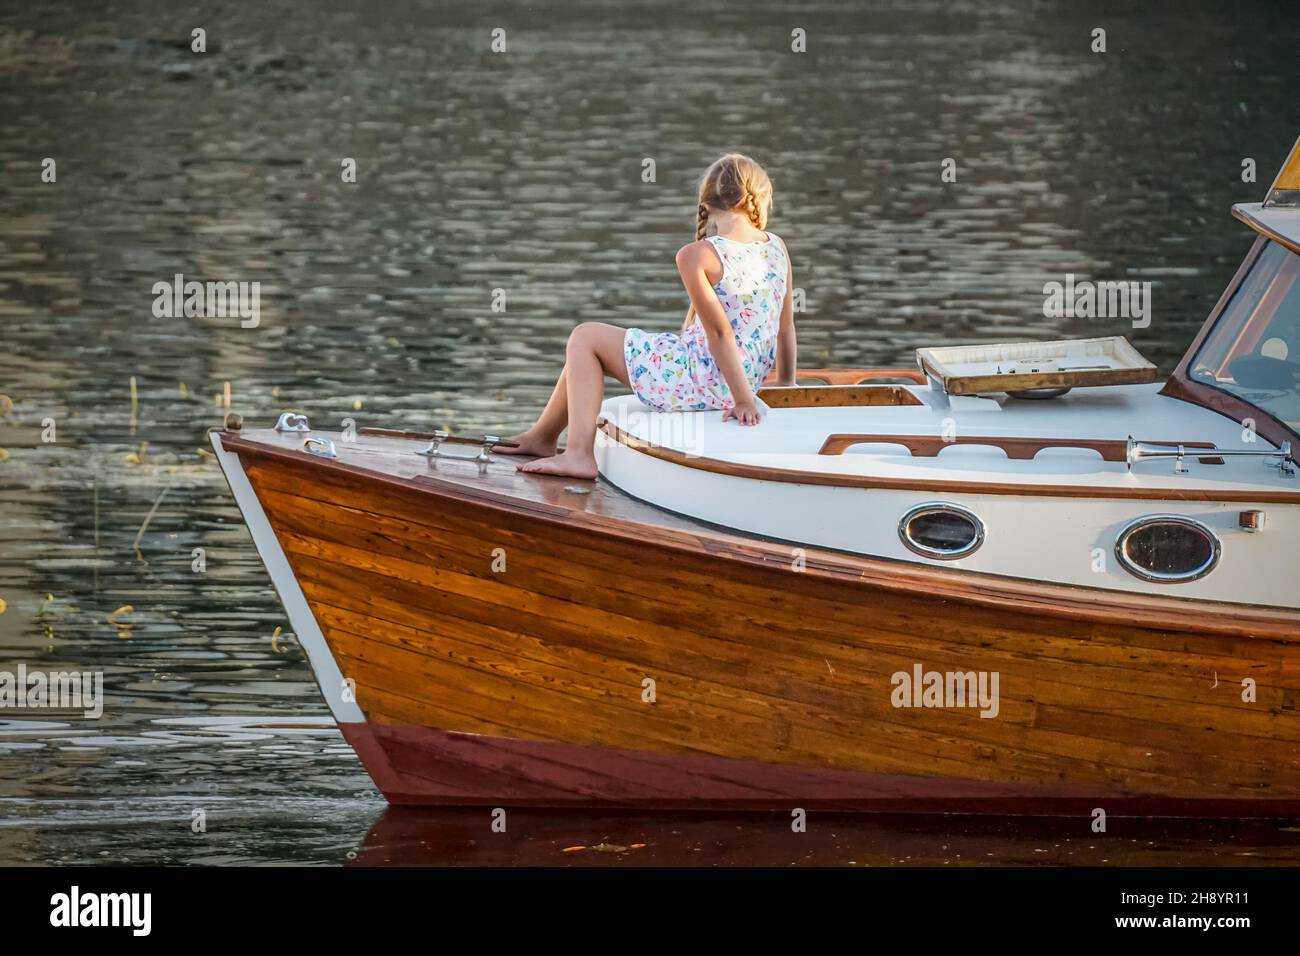 A girl on the front edge of a yacht. Stock Photo